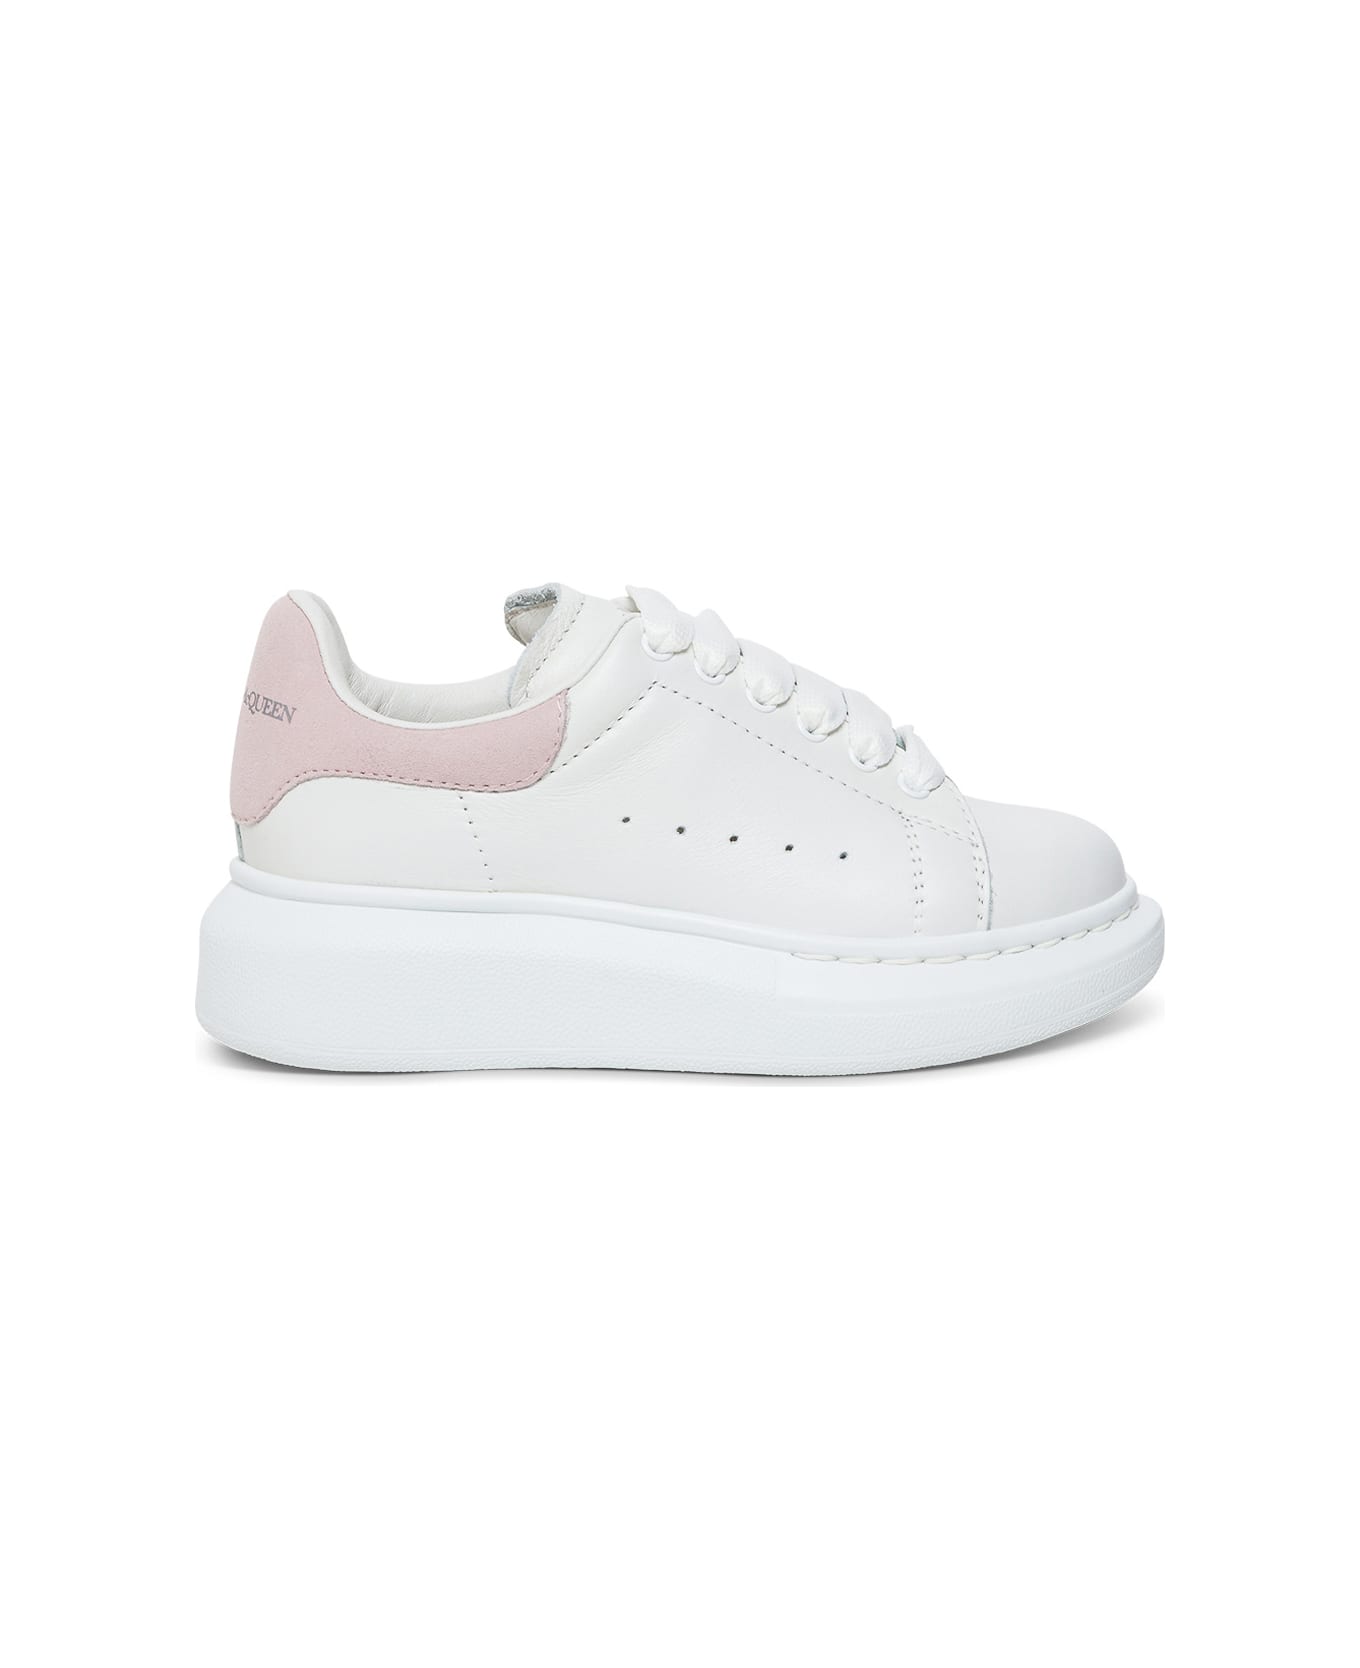 Alexander McQueen White Leather Oversize Sneakers - White